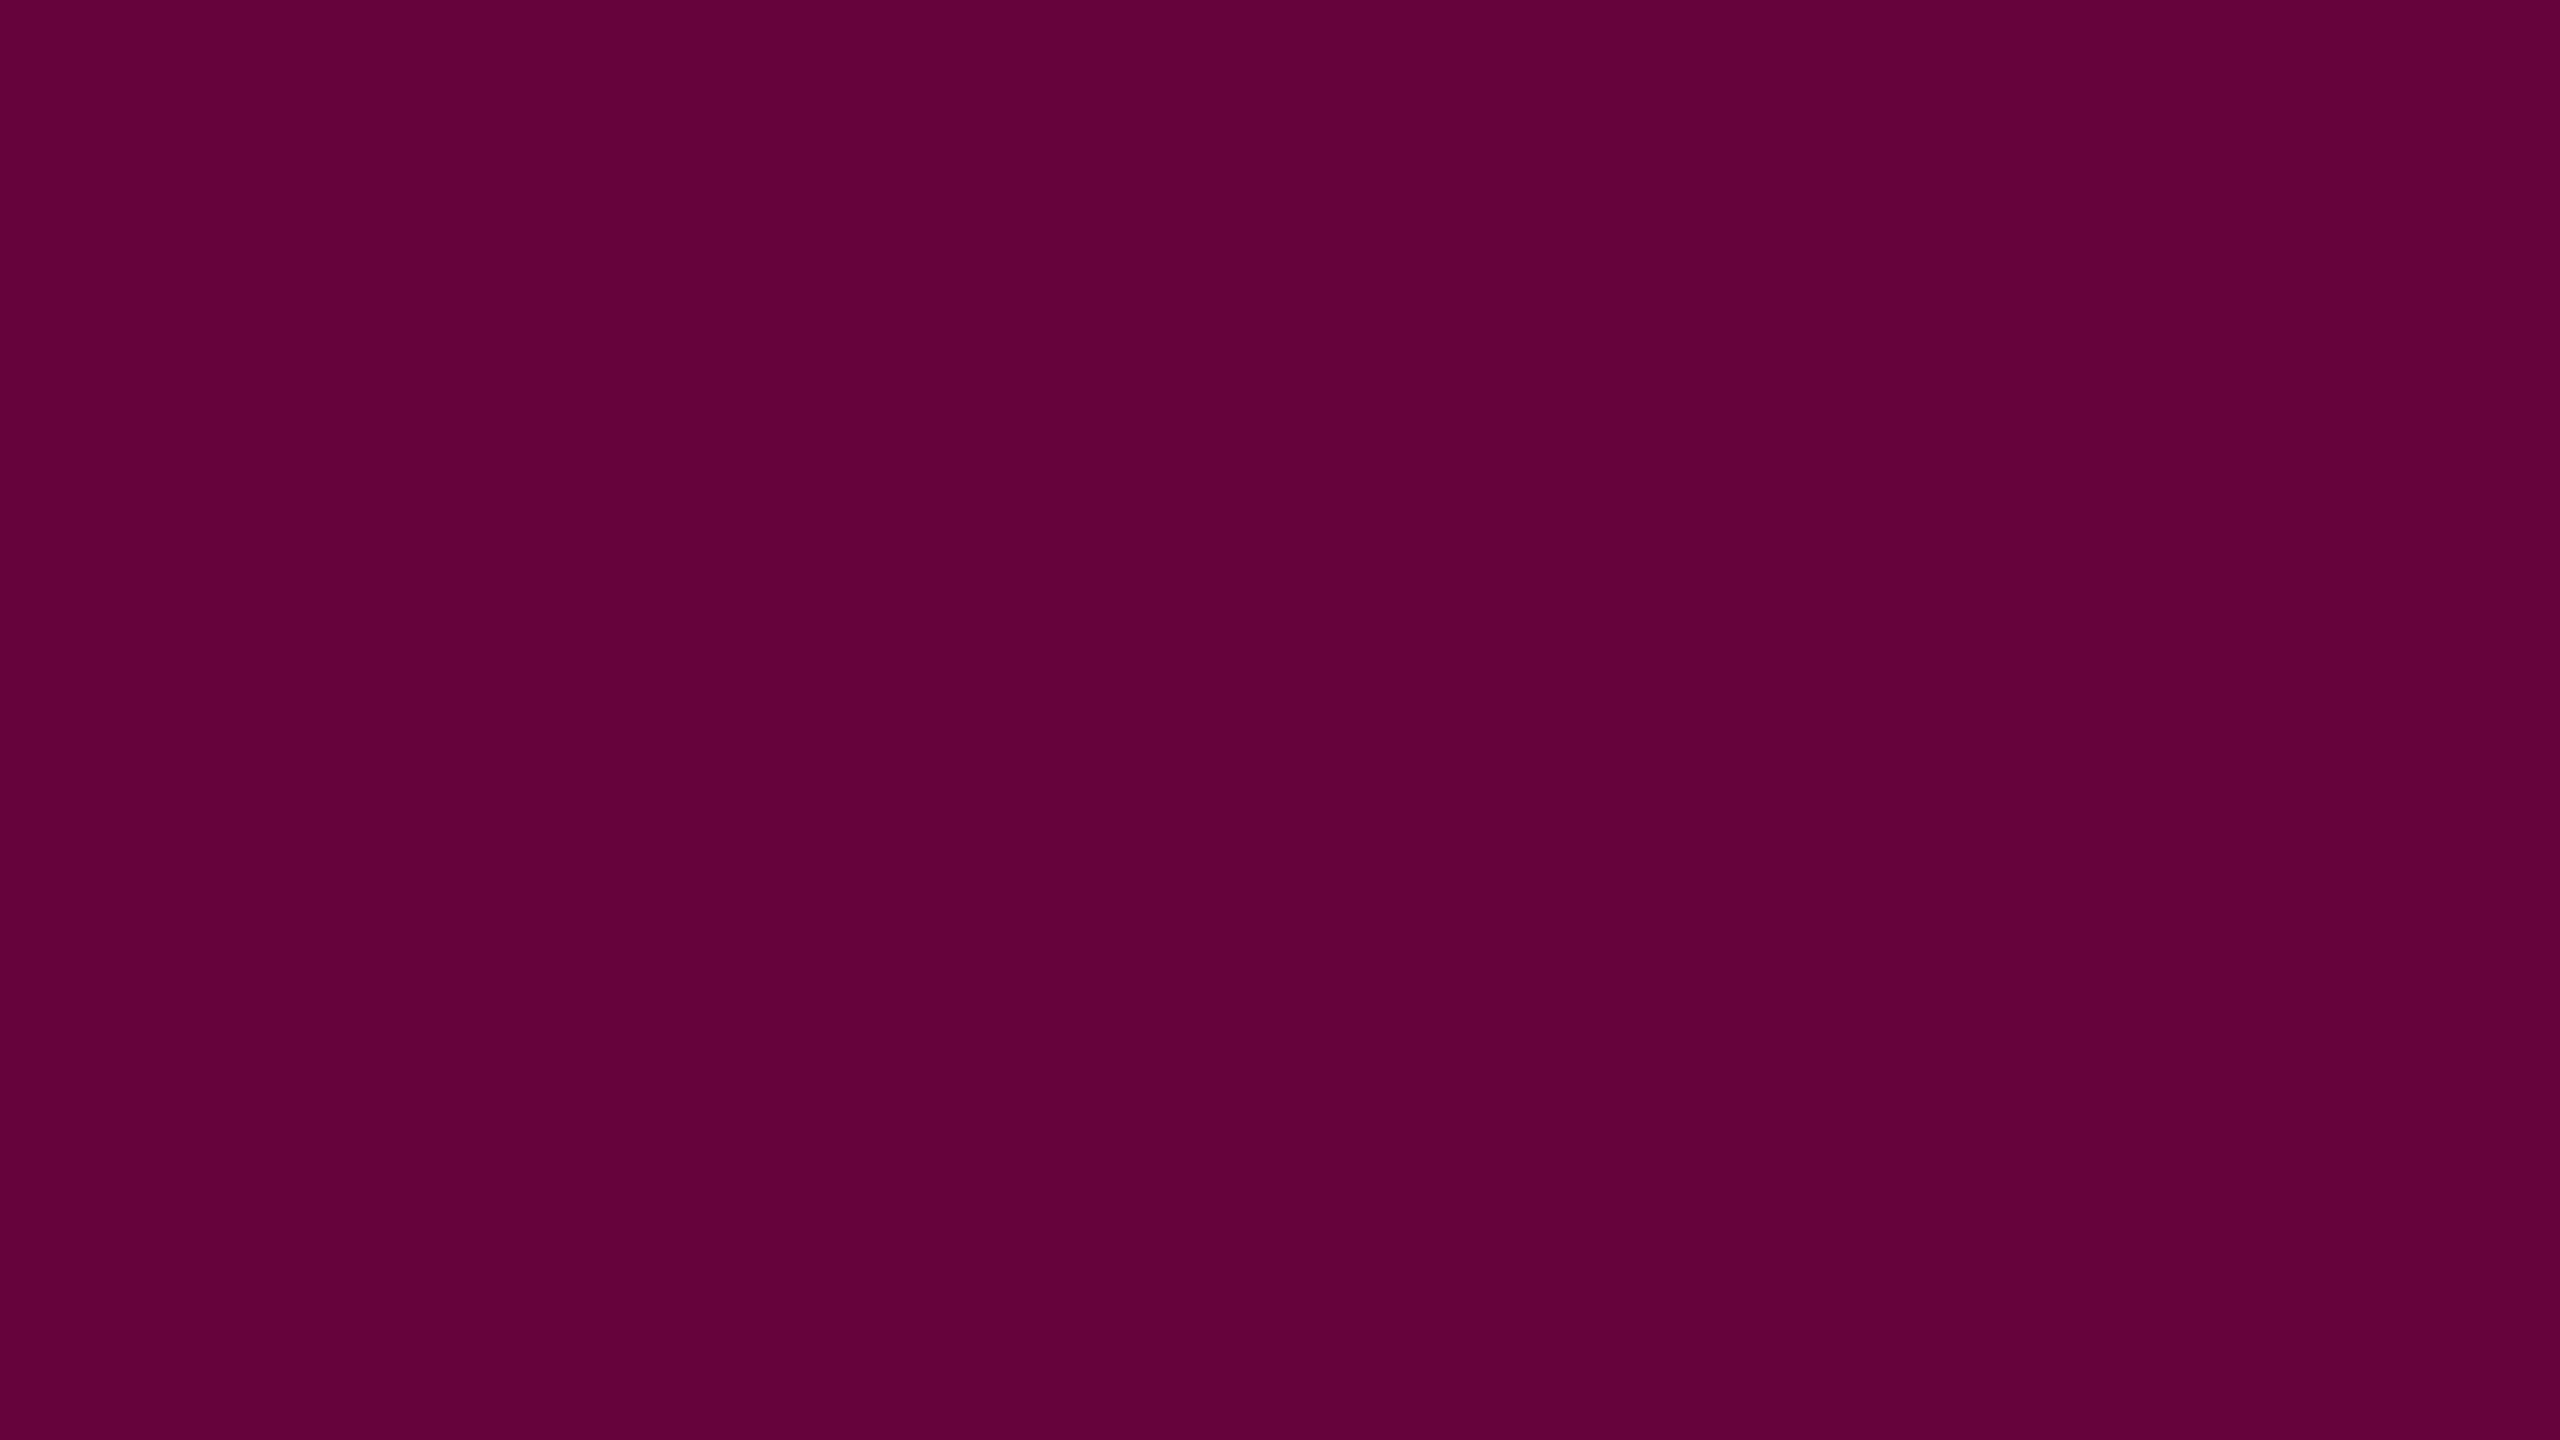 2560x1440-tyrian-purple-solid-color-background.jpg